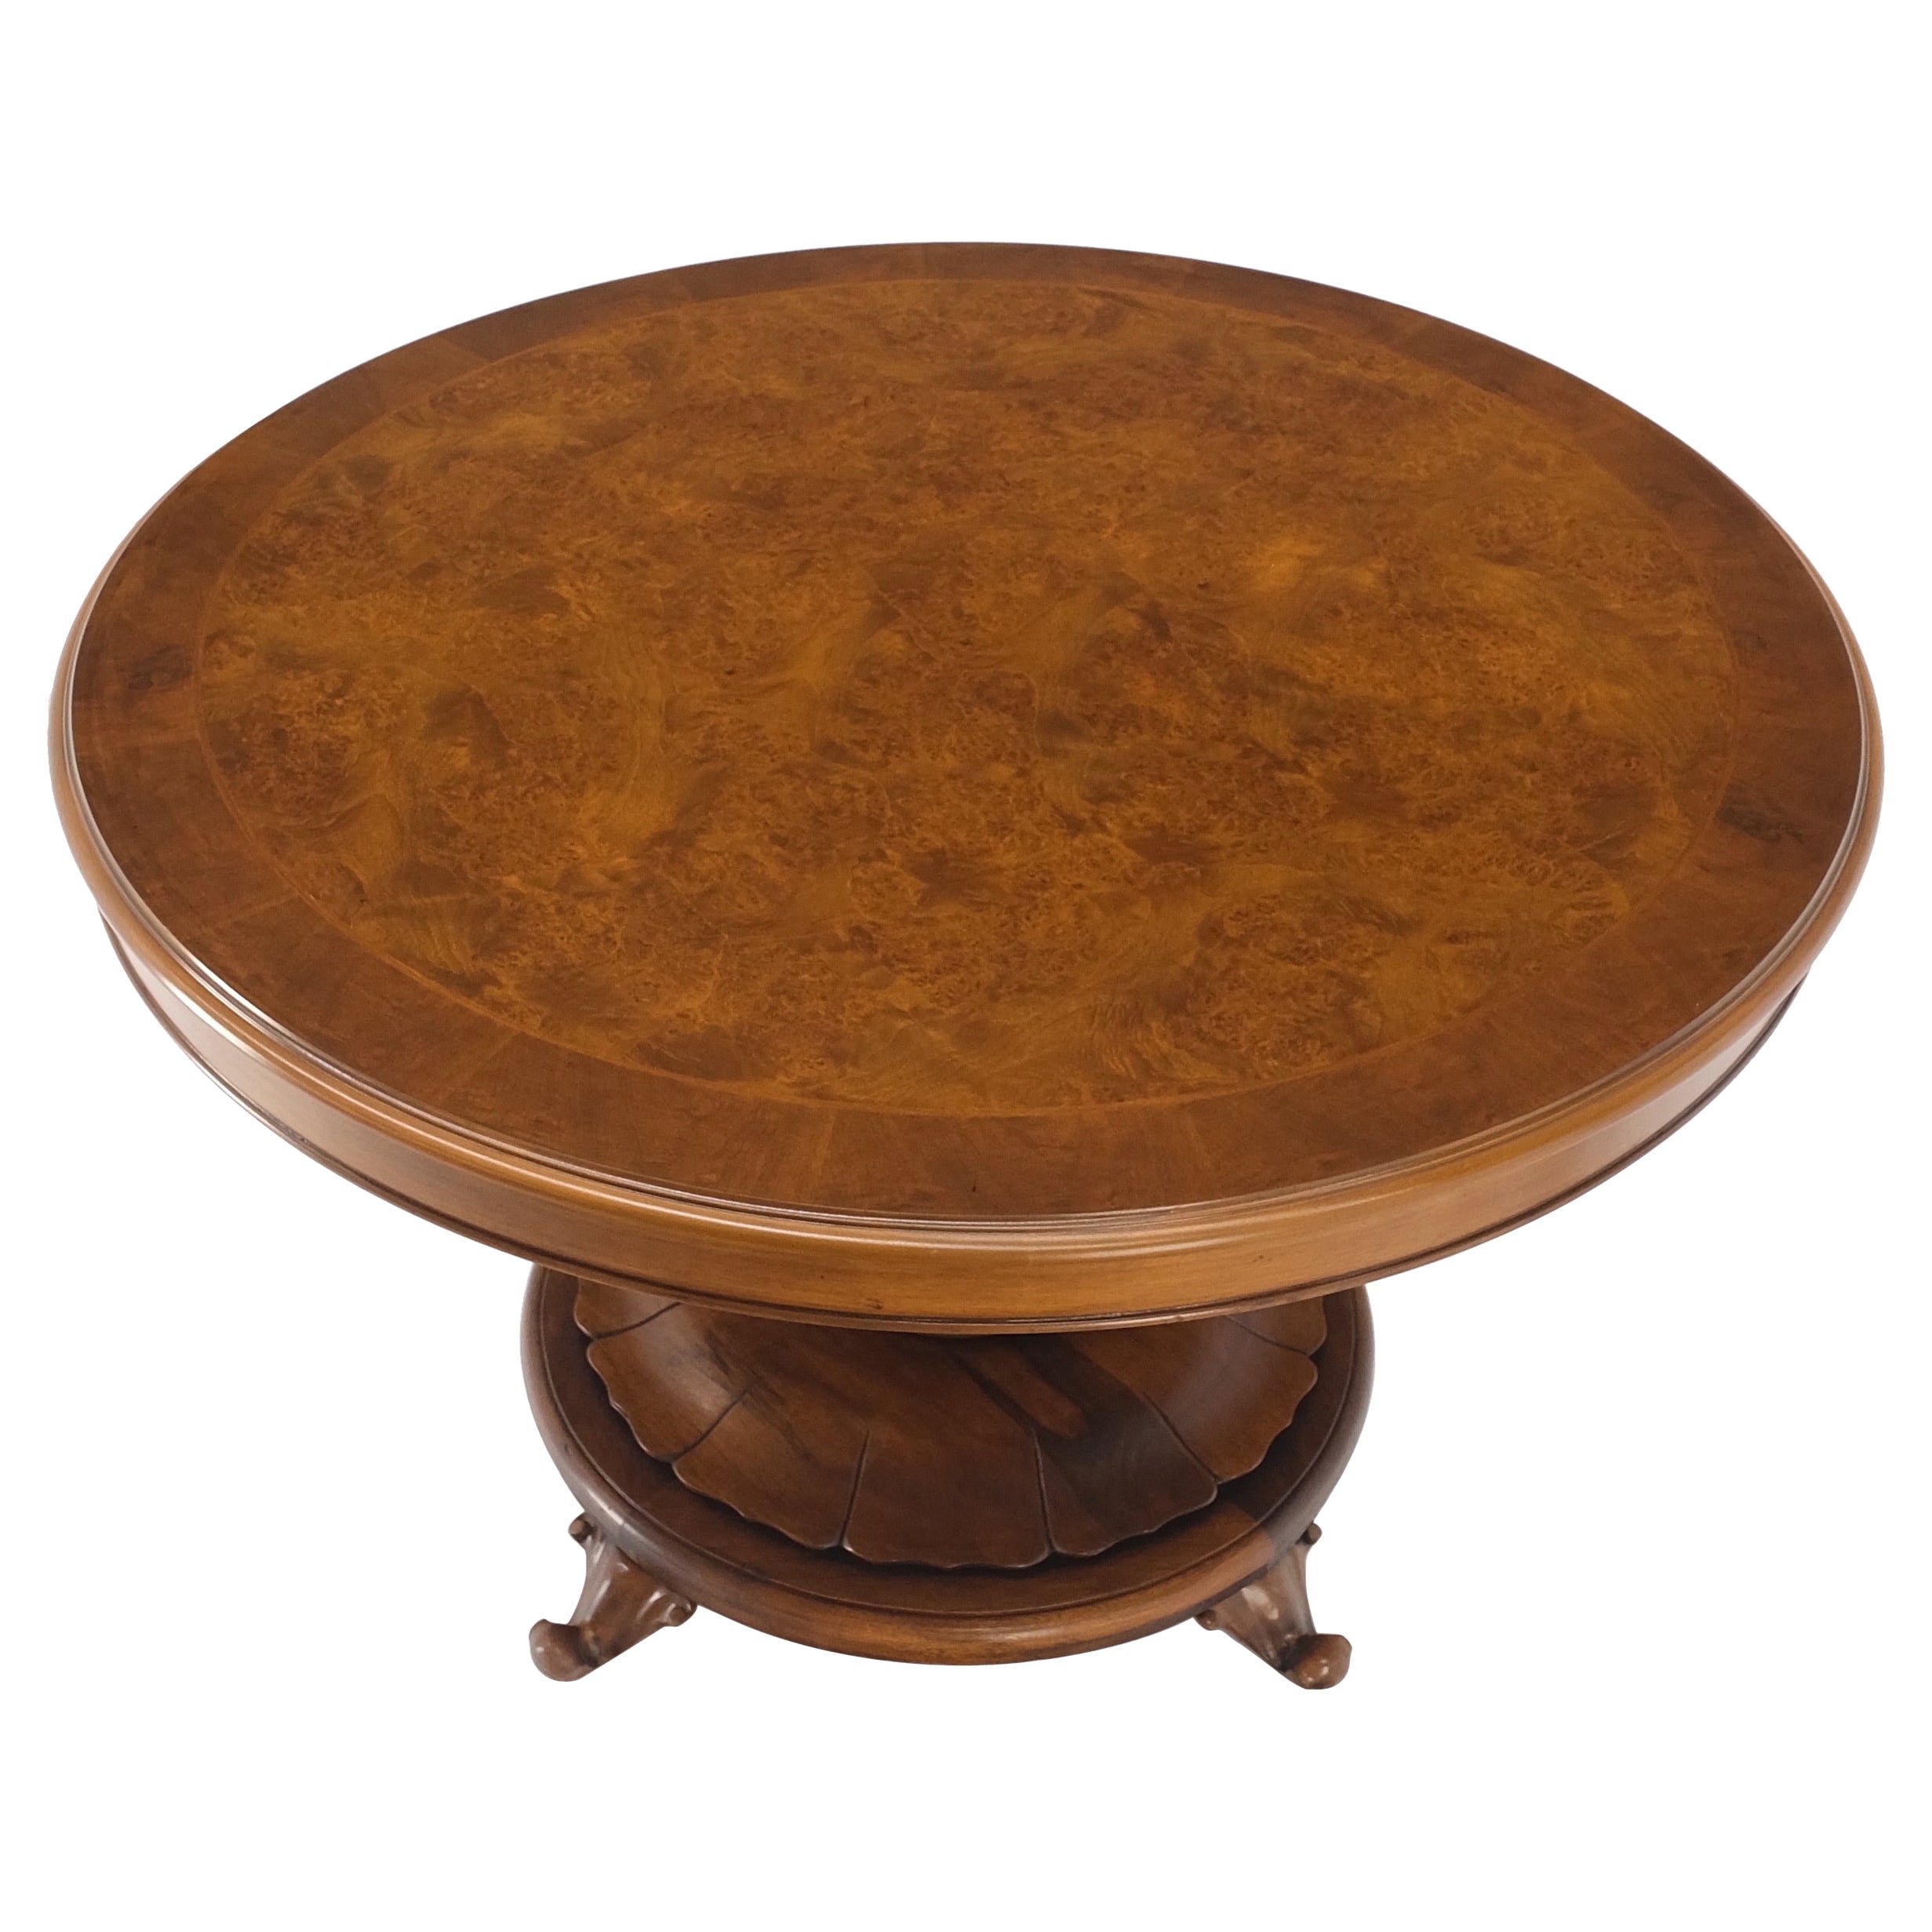 Burl Walnut Wood Top Round Carved Lotus Shape Base Dining Center Table Mint! For Sale